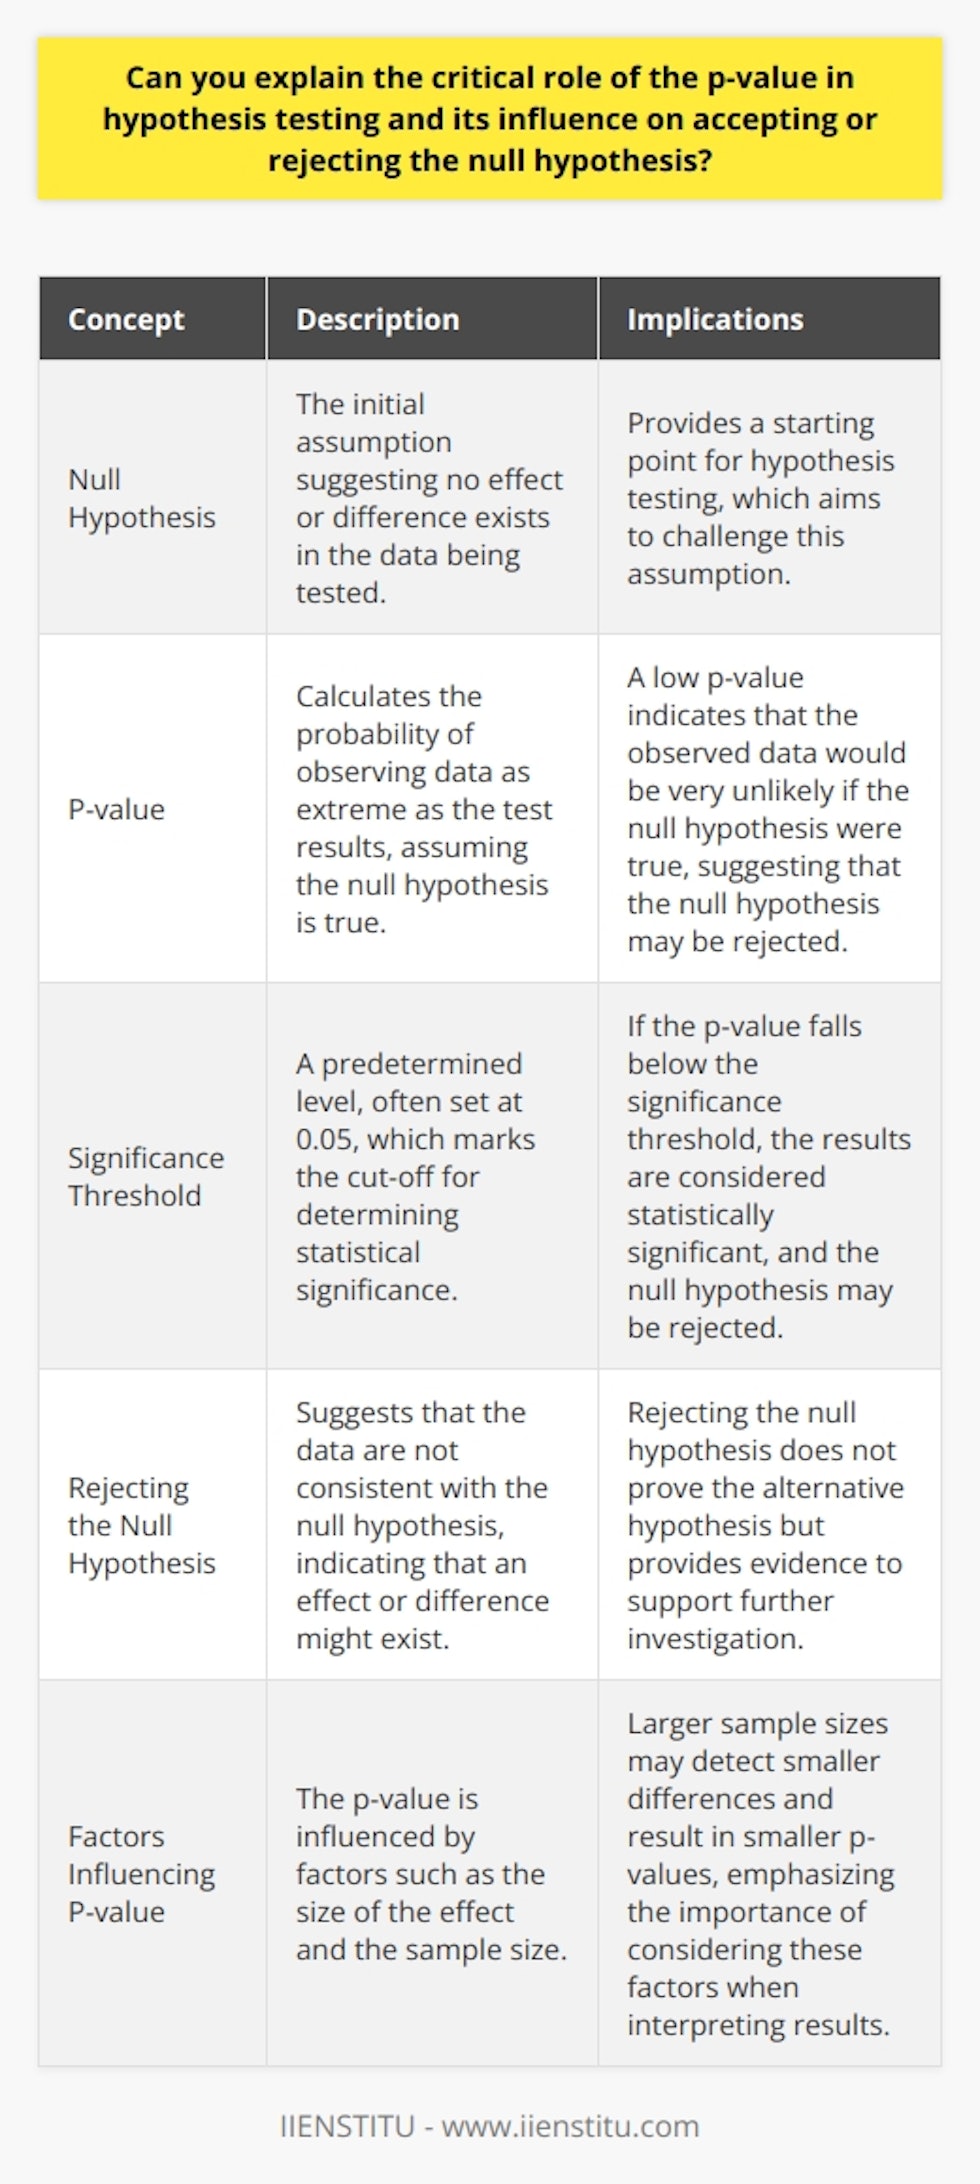 Understanding the P-value Researchers often turn to hypothesis testing to understand data. They make an initial assumption called the  null hypothesis . This hypothesis suggests no effect or no difference exists. To challenge this, they use an alternative hypothesis. The Null Hypothesis and P-value In hypothesis testing, the p-value helps measure the strength of the results against the null hypothesis. It calculates the probability of observing data as extreme as the test results, assuming the null hypothesis is true. A low p-value indicates that the observed data would be very unlikely if the null hypothesis were true. Significance Threshold Scientists usually set a significance level before testing. Often, this level is  0.05 . It marks the cut-off for determining statistical significance.   What Does Rejecting the Null Hypothesis Mean? Rejecting the null does not prove the alternative hypothesis. It merely suggests that the data are not consistent with the null. Researchers can be more confident that an effect or difference might exist. Misinterpretations of the P-value A common mistake is seeing the p-value as the odds that the null hypothesis is true or false. It is not. It only assesses how compatible the data are with the null hypothesis. Influencing Factors Several factors influence the p-value. This includes the size of the effect and the sample size. Larger samples may detect smaller differences and result in smaller p-values. The p-value is critical in deciding whether to accept or reject the null hypothesis. It quantifies how surprising the data are, assuming the null is true. A small p-value can lead to rejecting the null, paving the way for new scientific insights. However, it is crucial to use this tool wisely, with an understanding of its limitations and context.